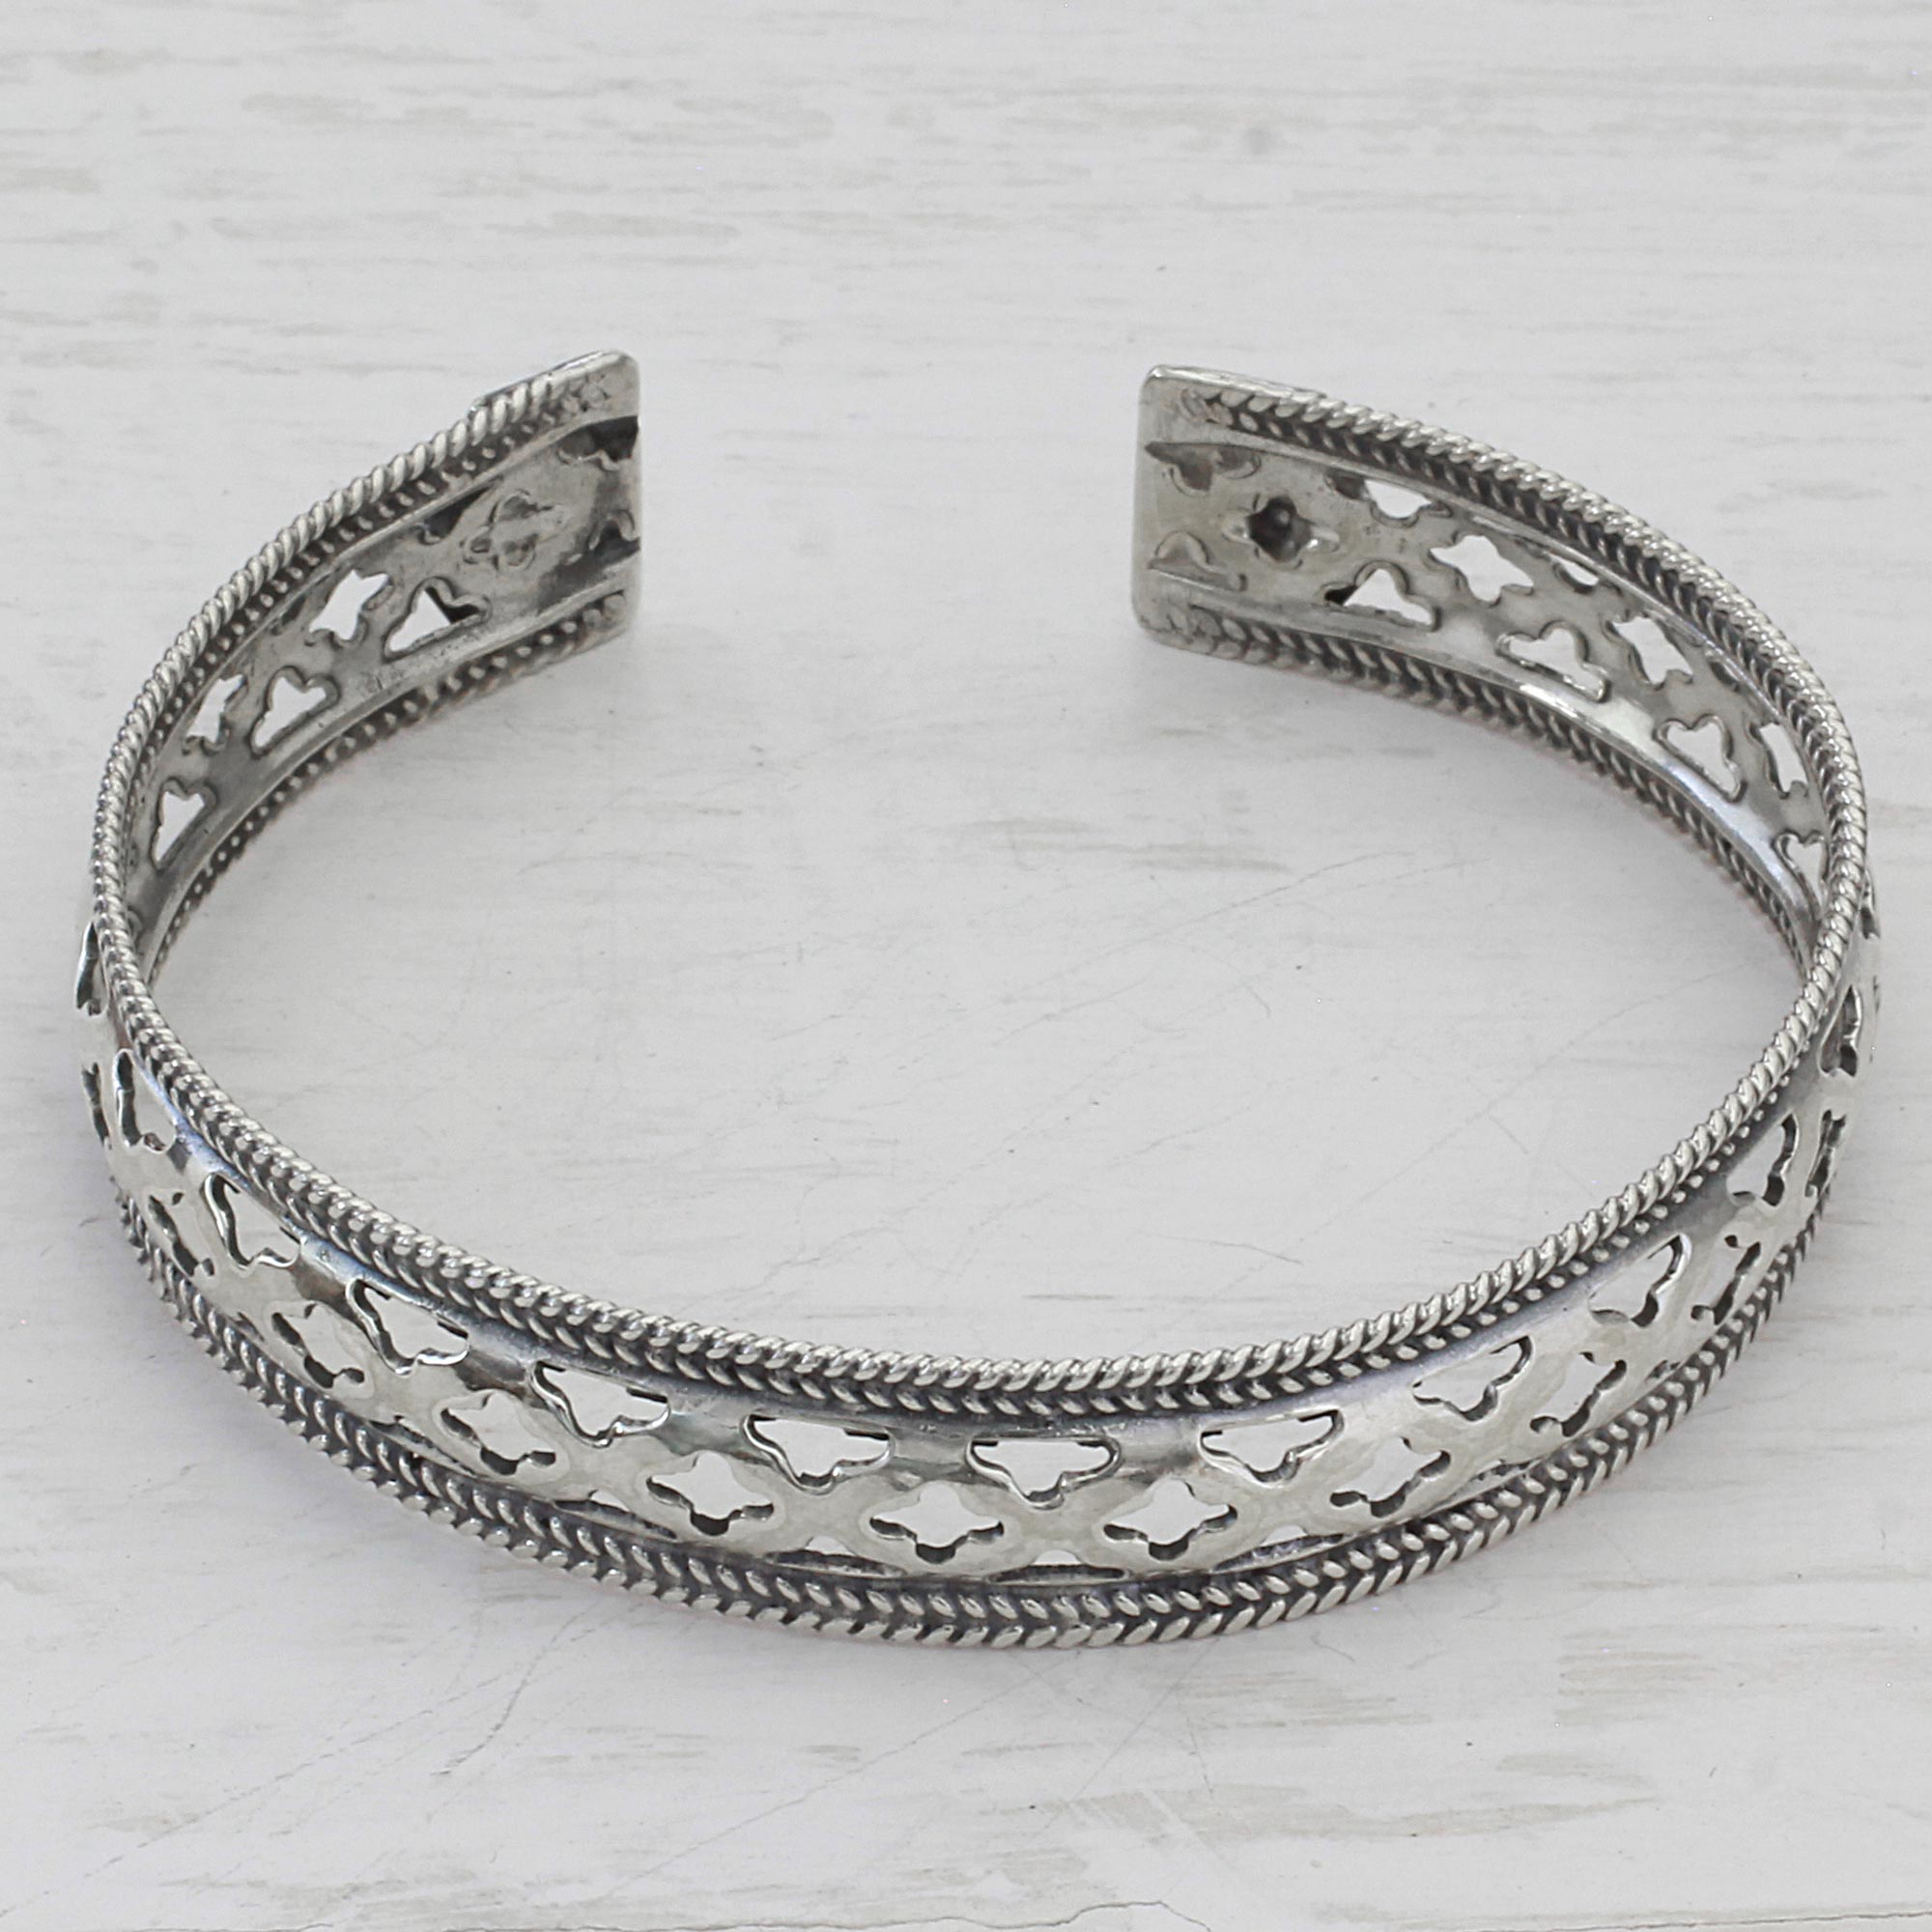 UNICEF Market | Artisan Crafted 925 Silver Indian Jali Motif Cuff ...